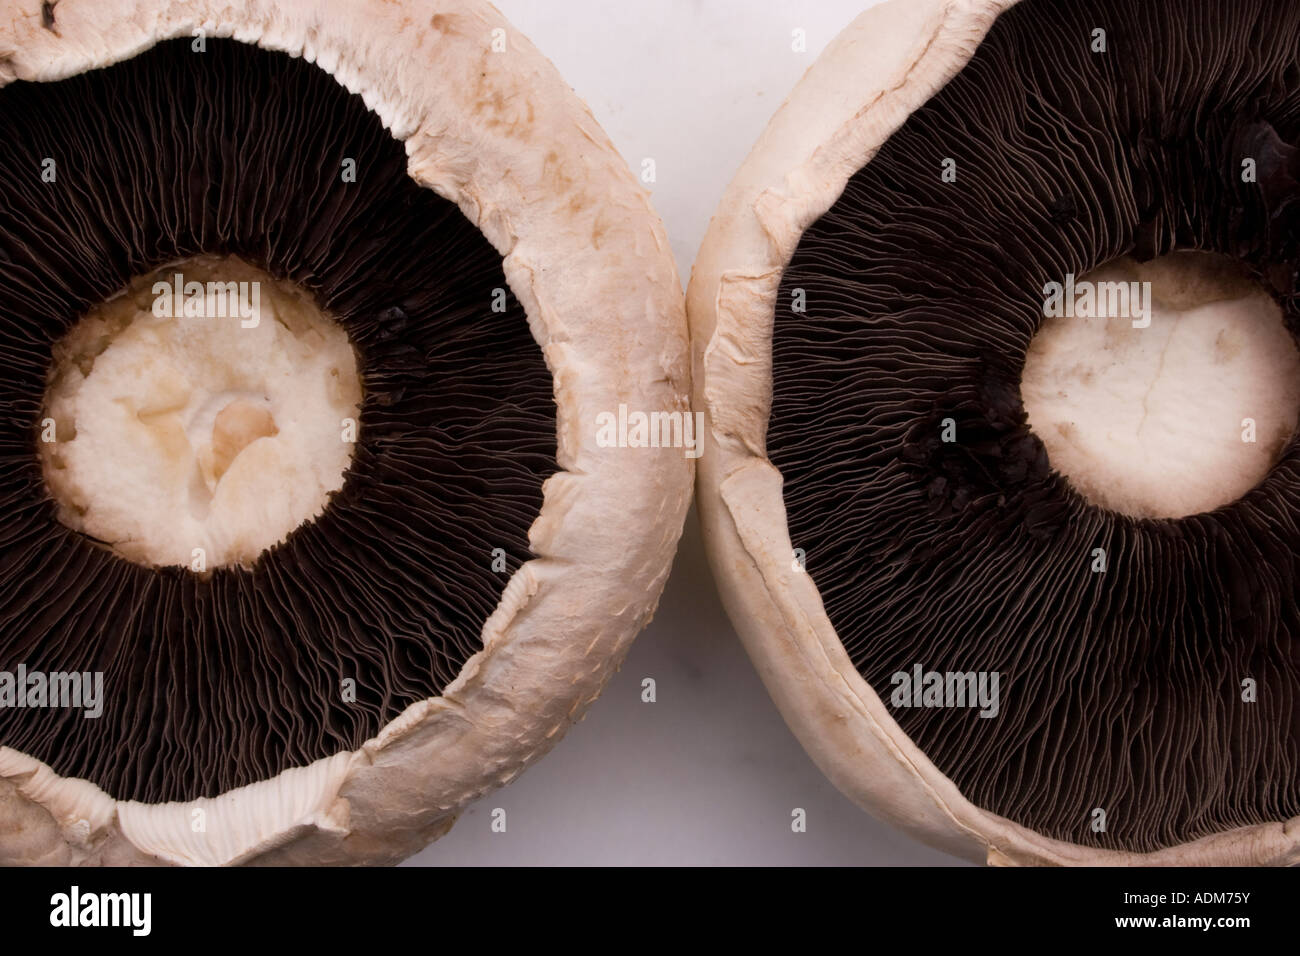 Underside Two large flat button mushrooms on kitchen table Stock Photo